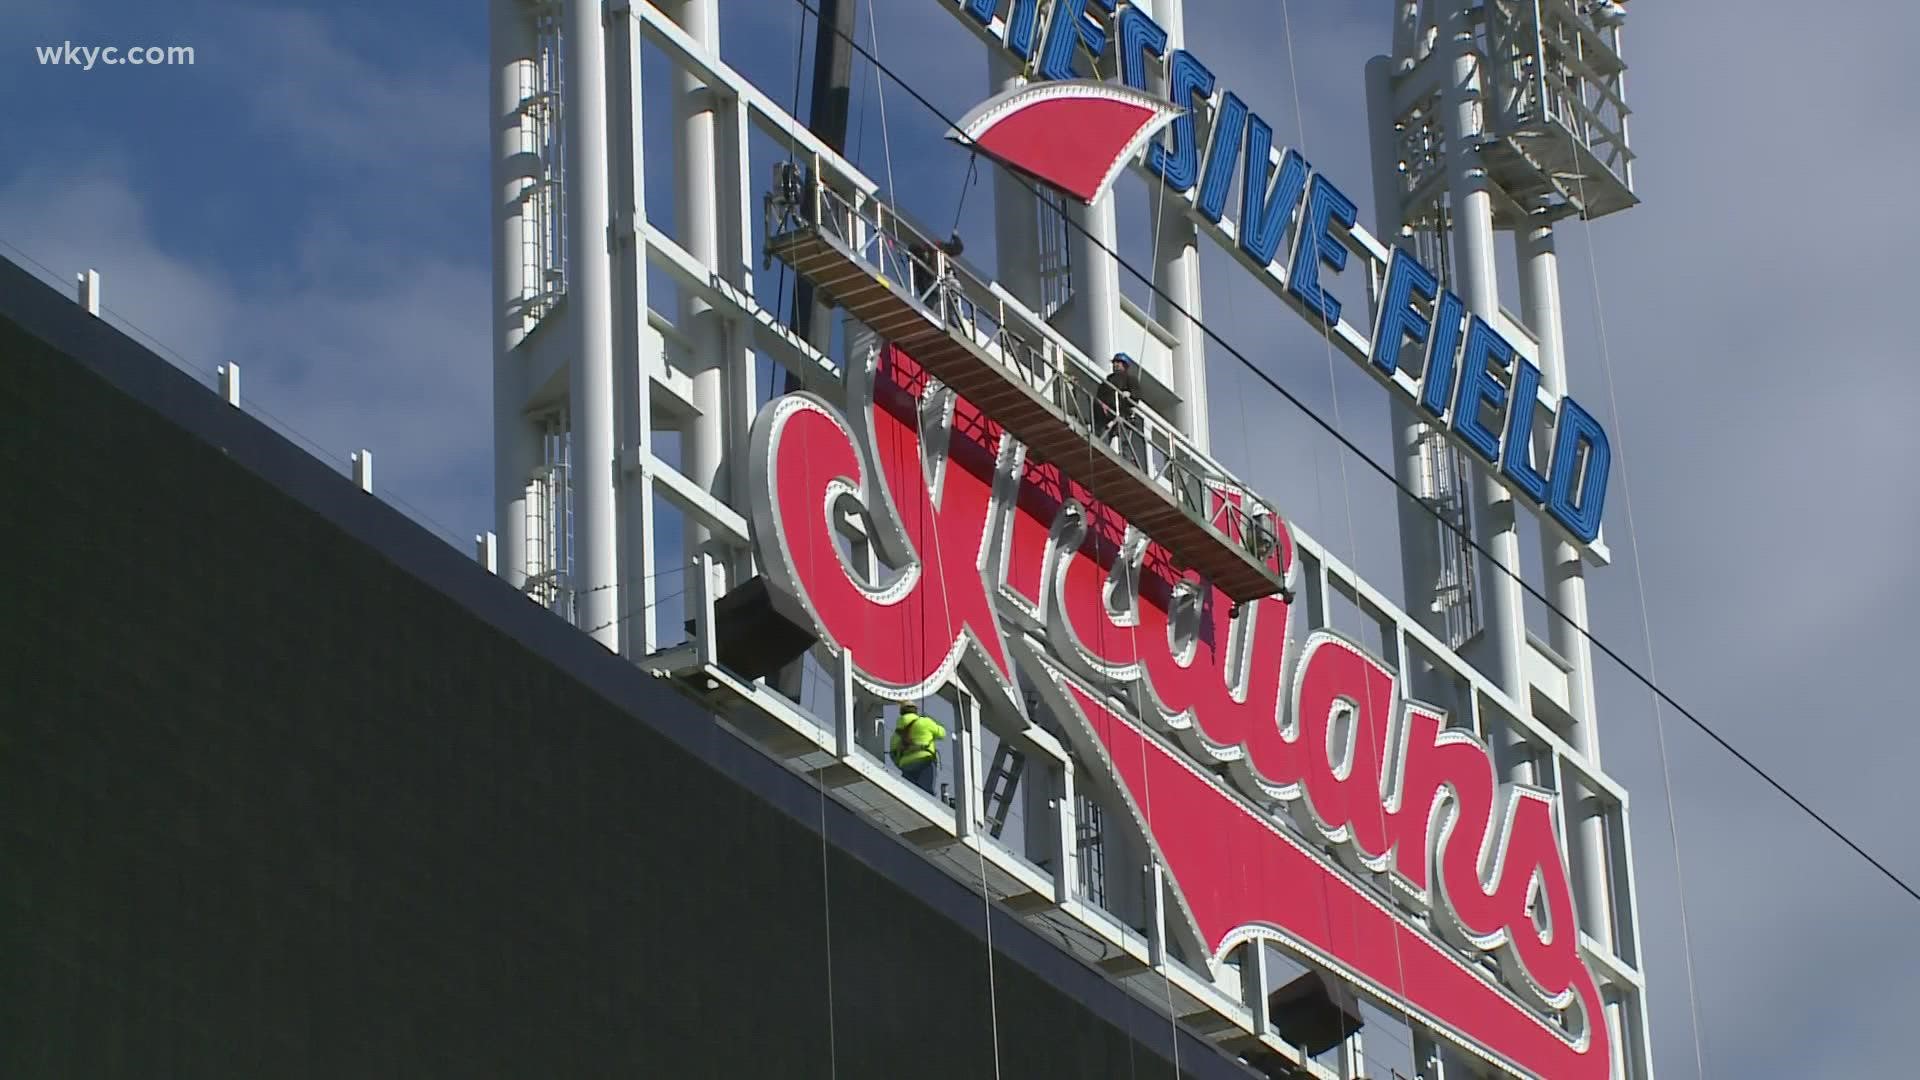 It's the end of an era. The Cleveland Indians have started the process of removing the team's name from the Progressive Field scoreboard.